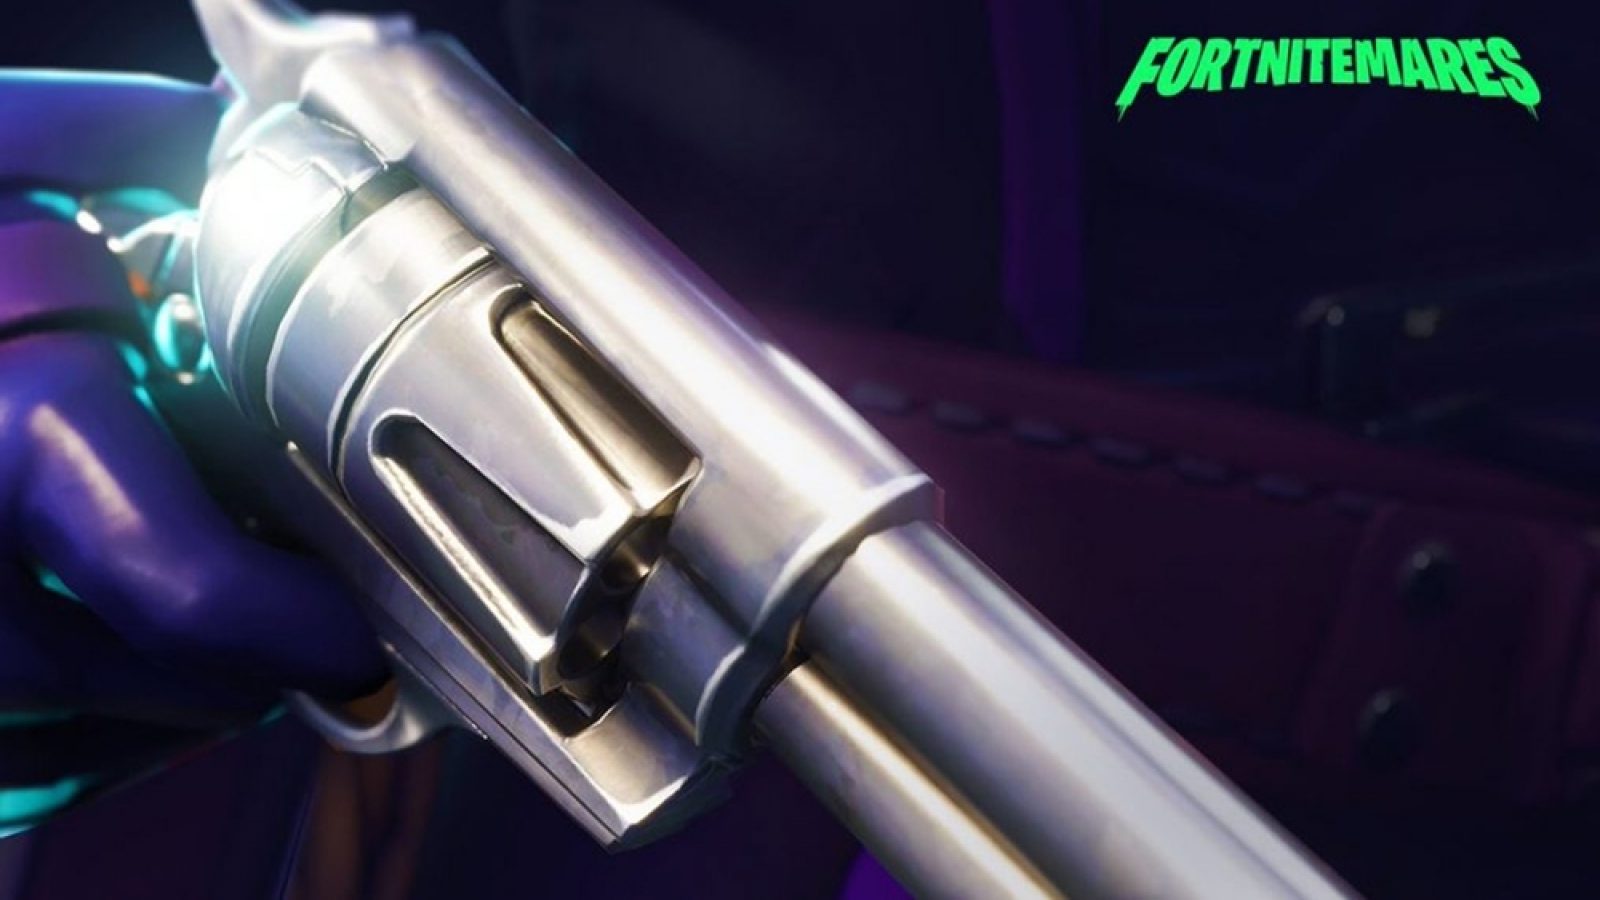 Fortnitemares Start And End Dates Have Been Revealed